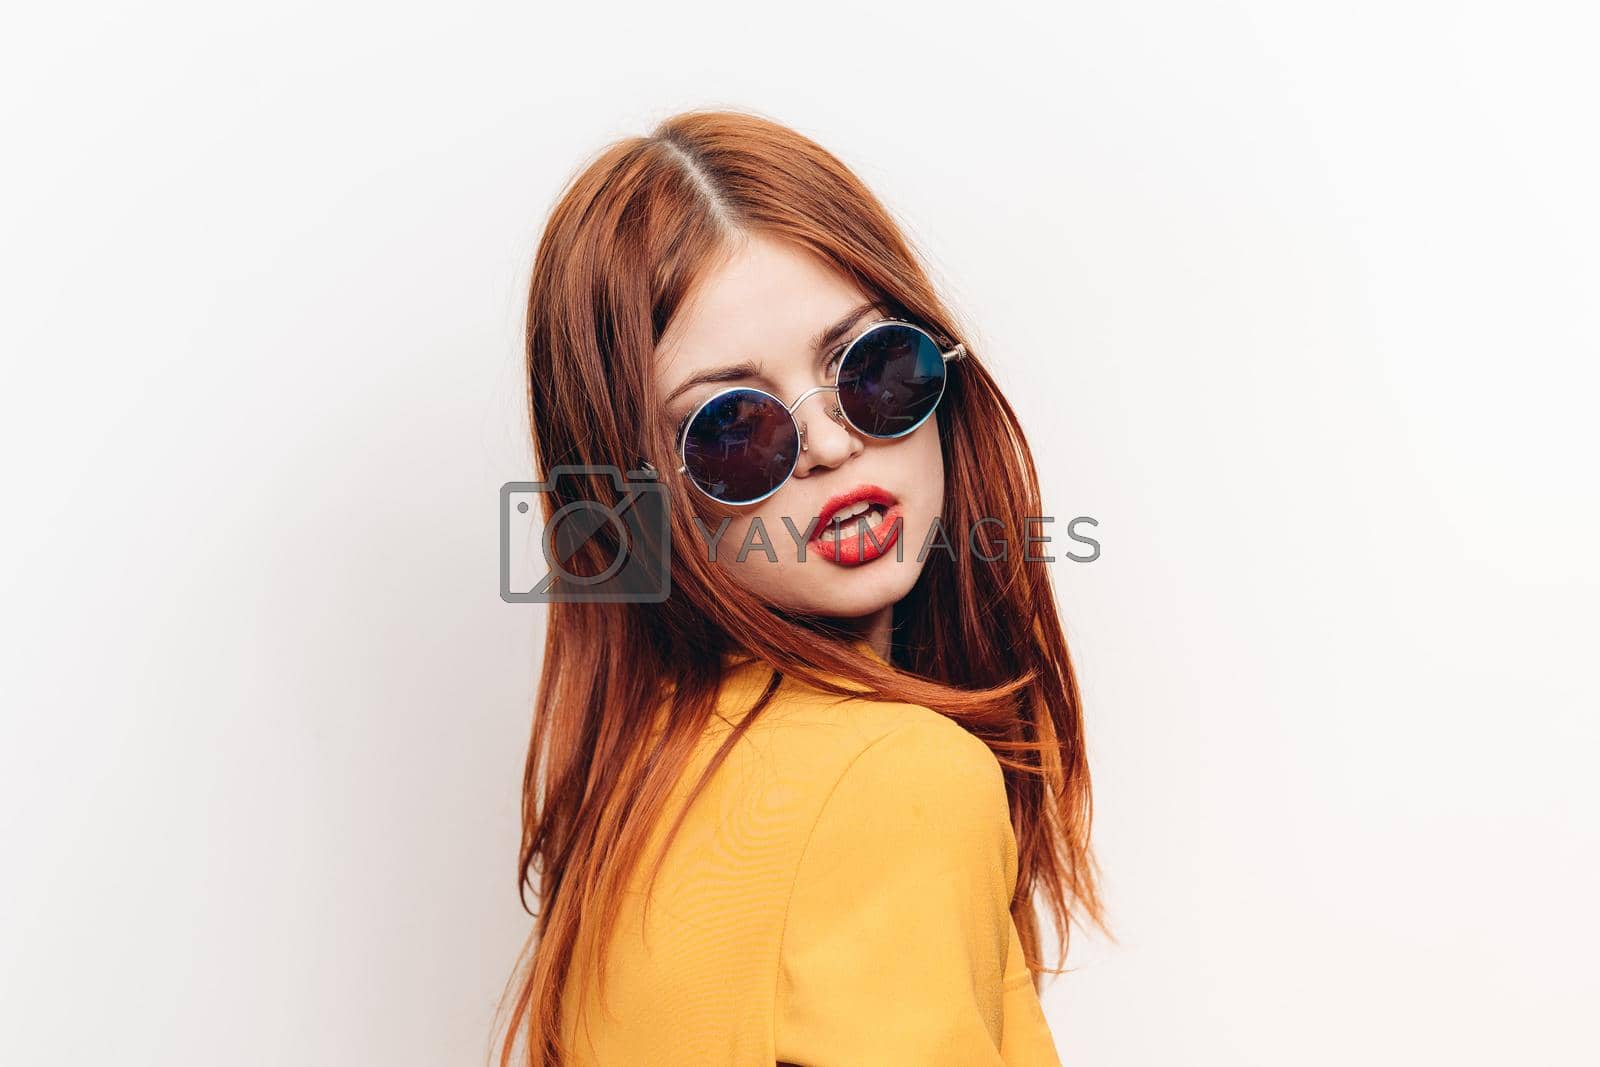 Royalty free image of attractive woman hairstyle glamor sunglasses glamor light background by Vichizh